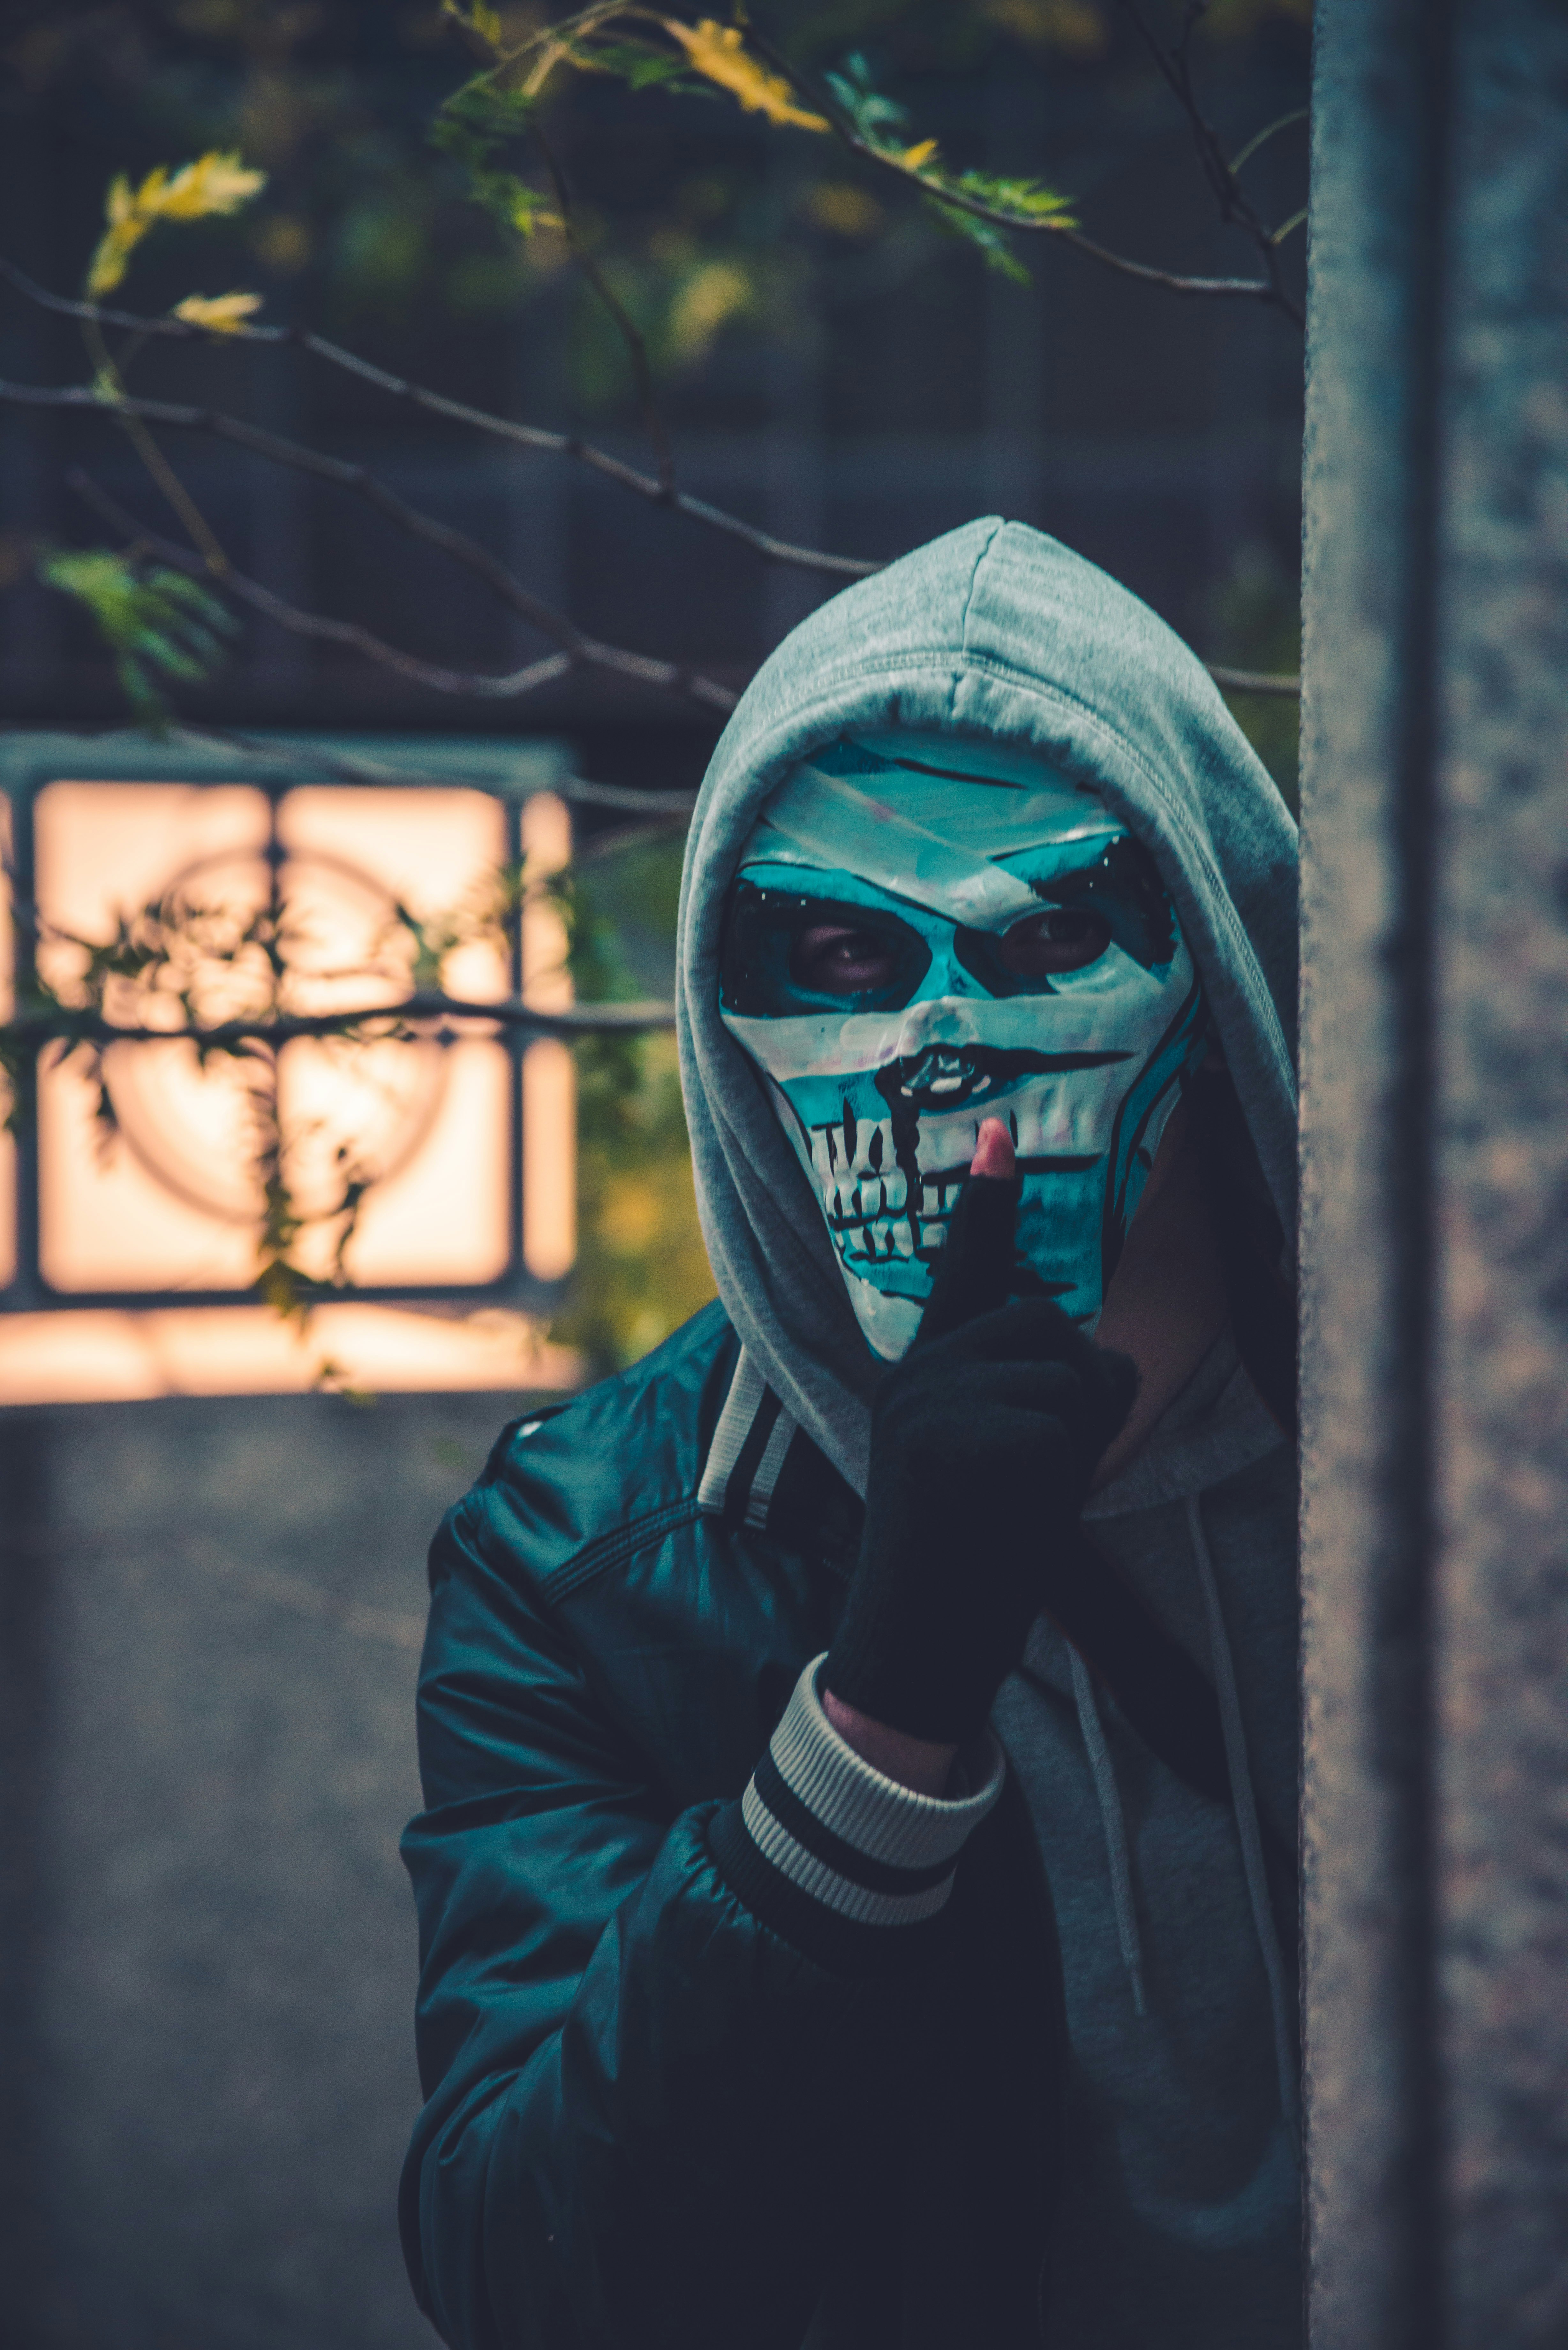 photo of person wearing mask near barbed wire